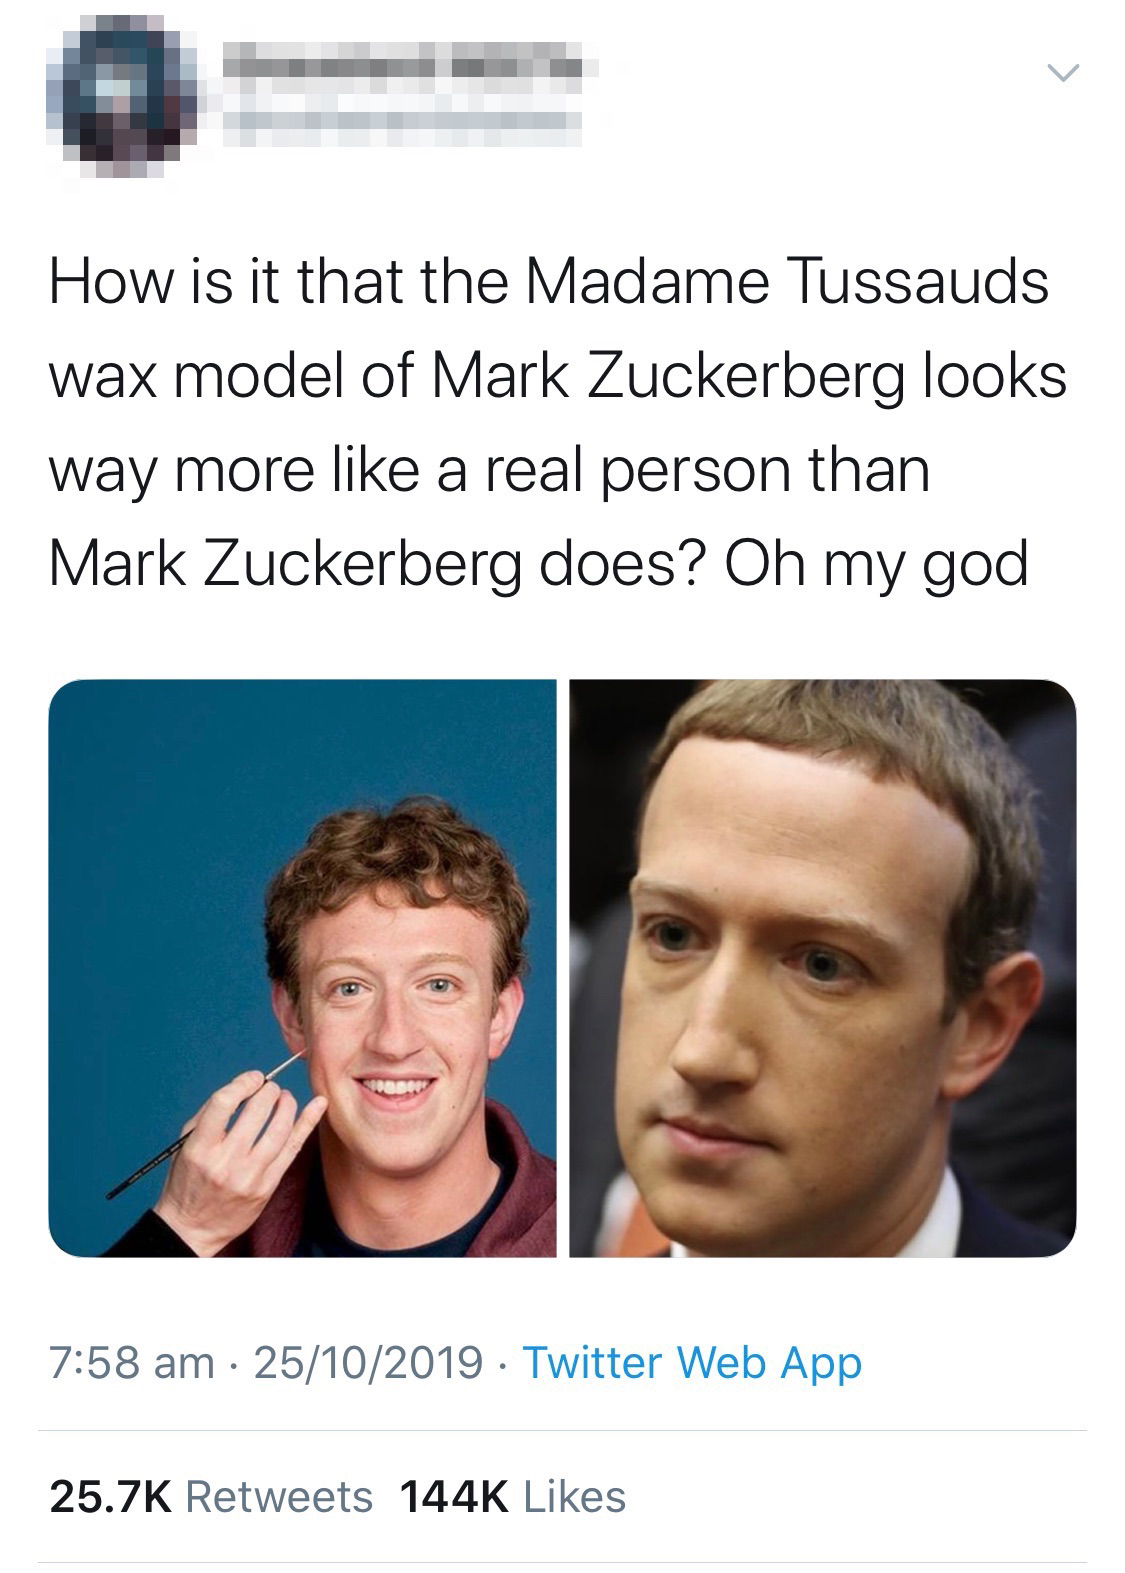 Will the real Mark Zuckerberg please stand up?